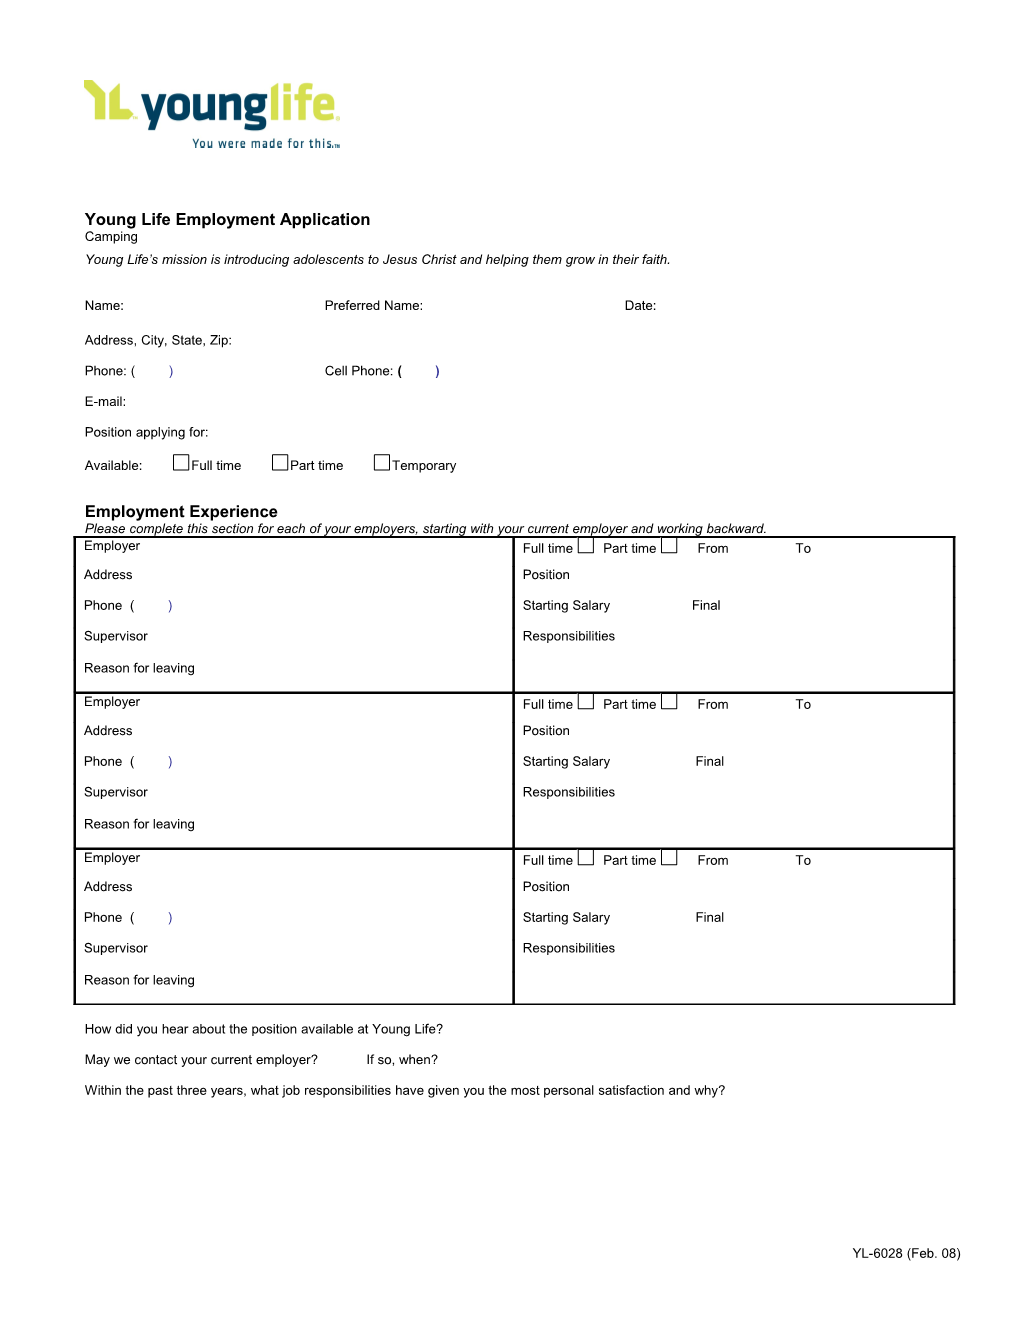 Young Life Employment Application